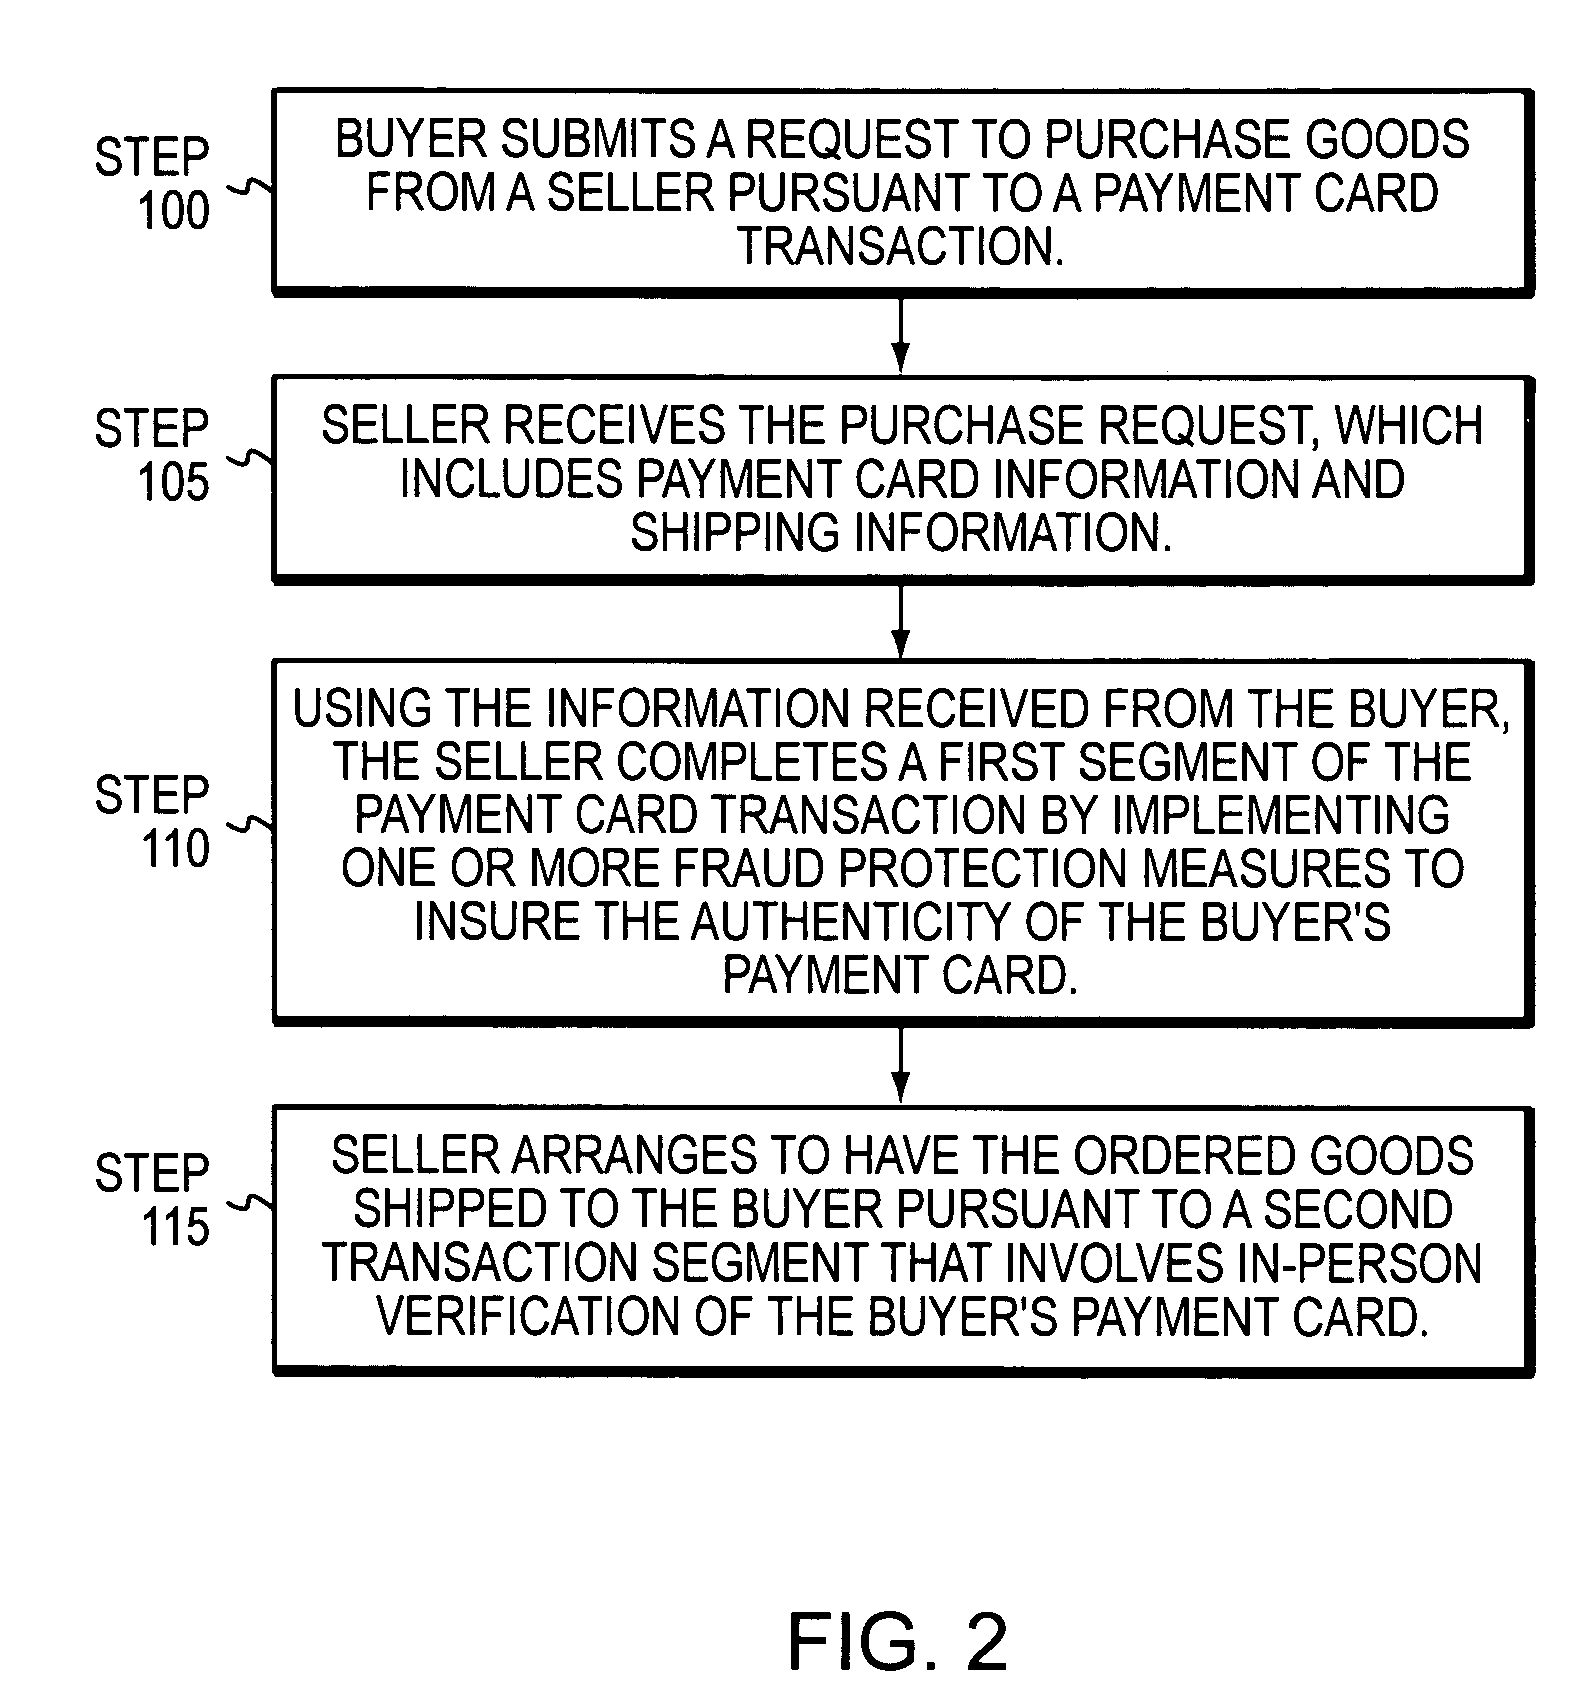 Delivery systems and methods involving verification of a payment card from a handheld device